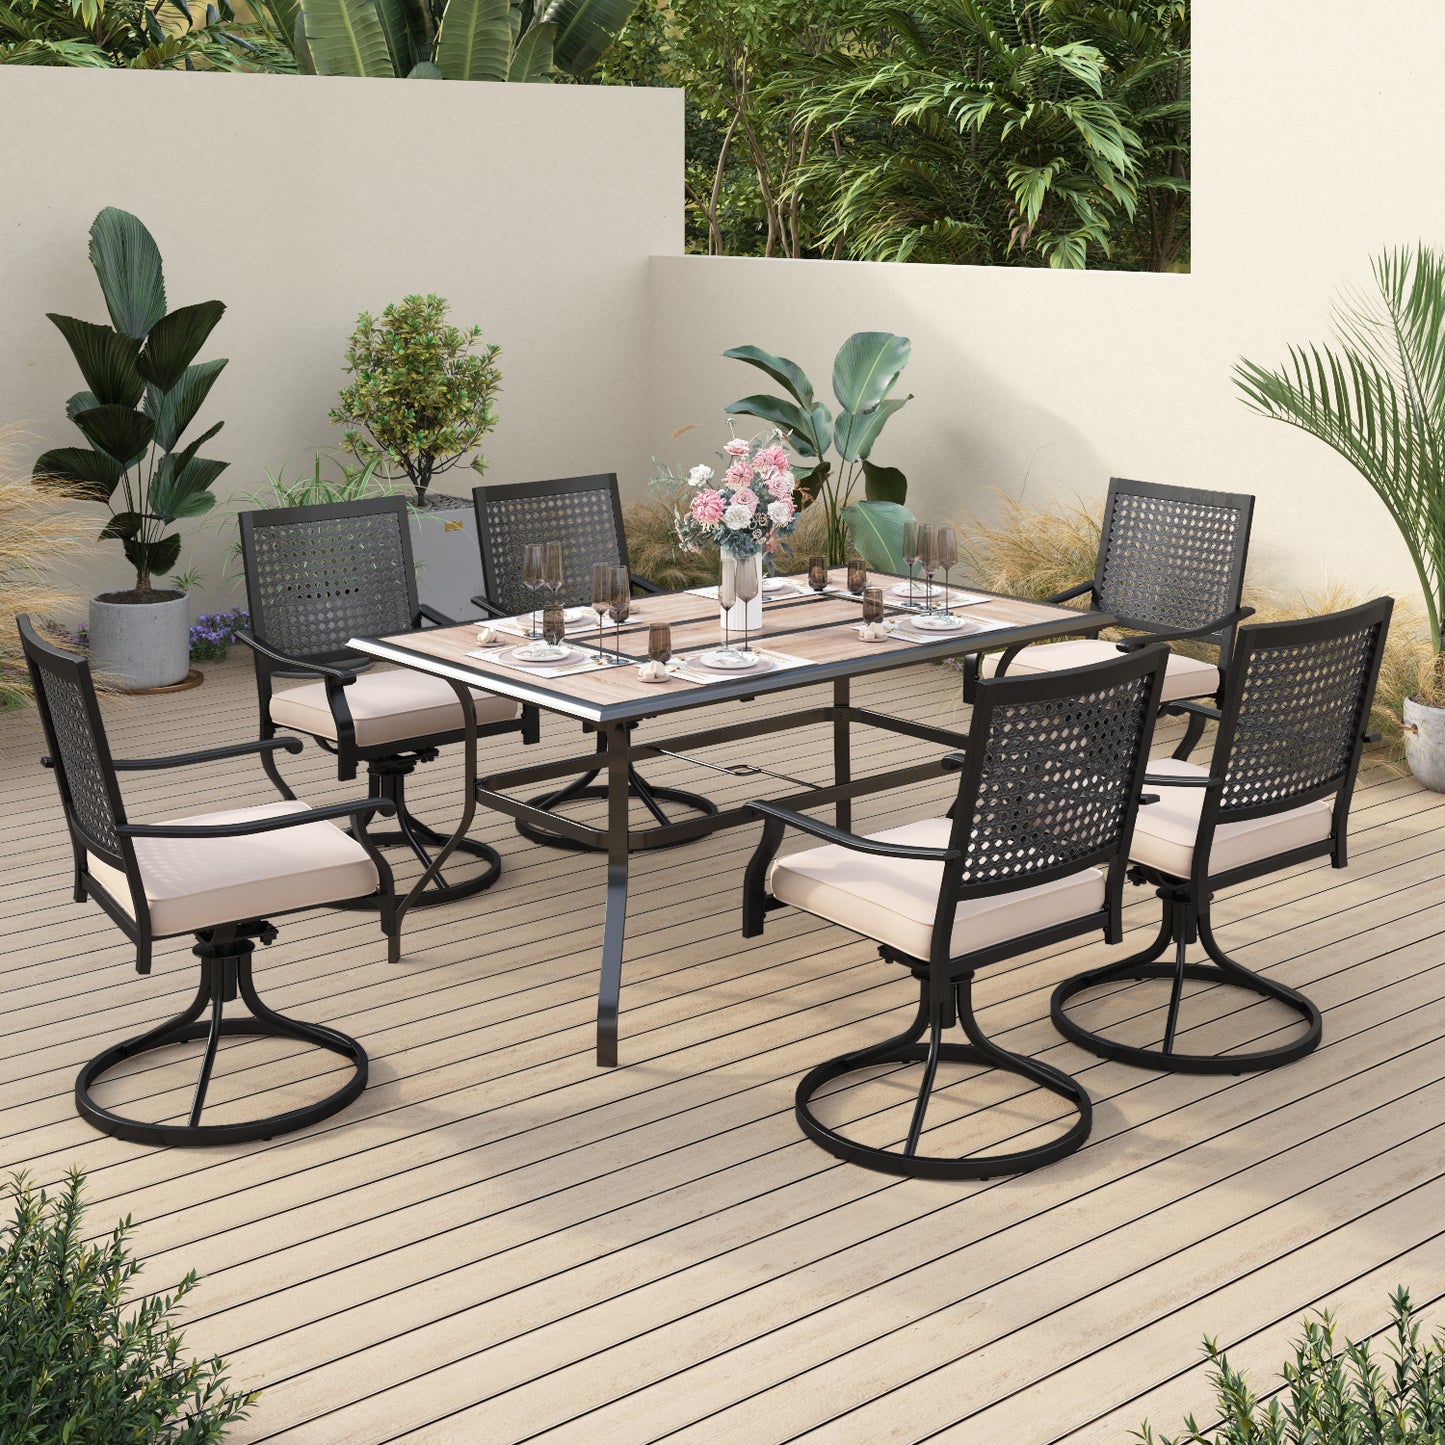 Sophia & William 7 Piece Outdoor Patio Dining Set 6 Patio Dining Swivel Chairs and 60" * 38" Metal Dining Table, with Wooden-like Table Top Suitable for Patio Outdoor Backyard